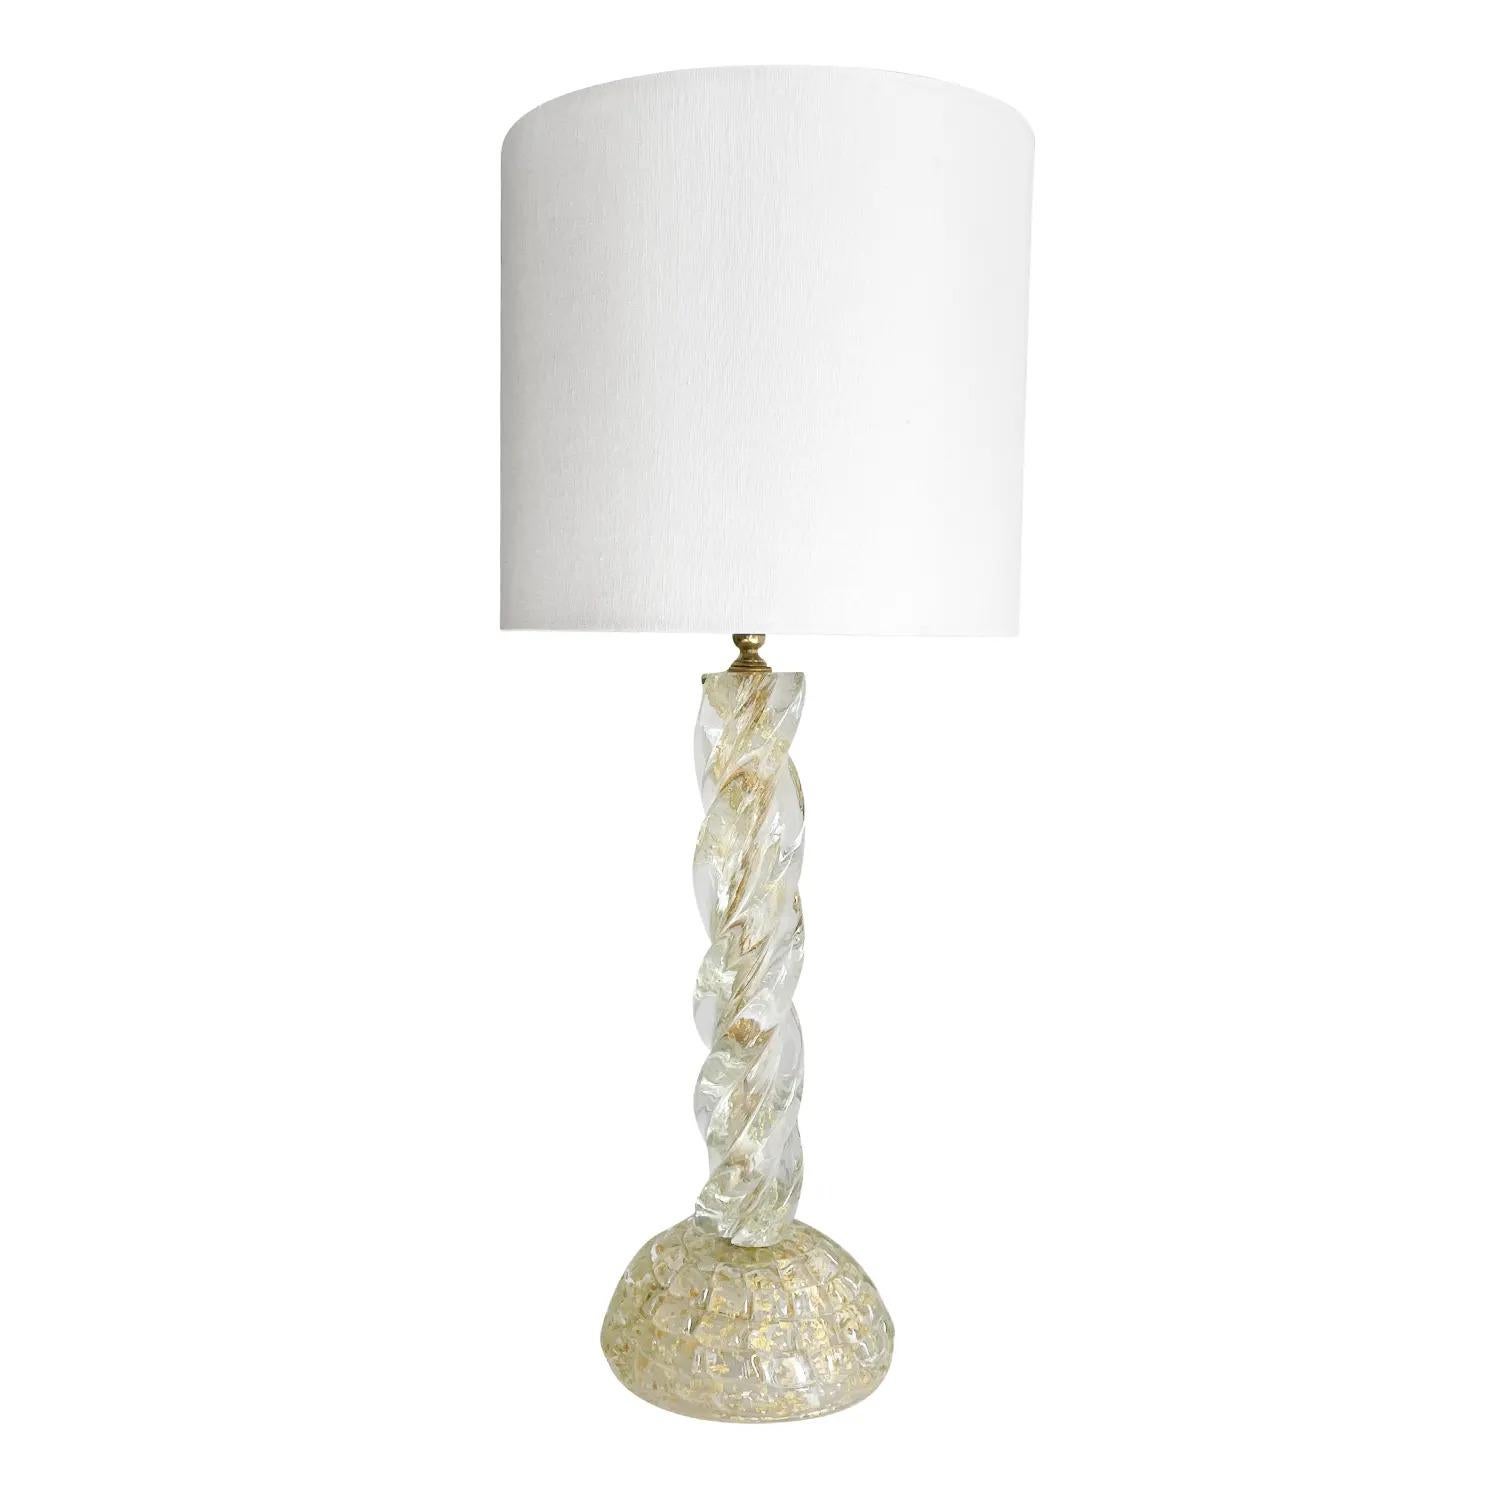 A clear, vintage Mid-Century Modern Italian table lamp with a new white shade, made of hand blow Murano glass, designed by Ercole Barovier and produced by Barovier & Toso, in good condition. The tall desk light was selected by Samuel Marx for the